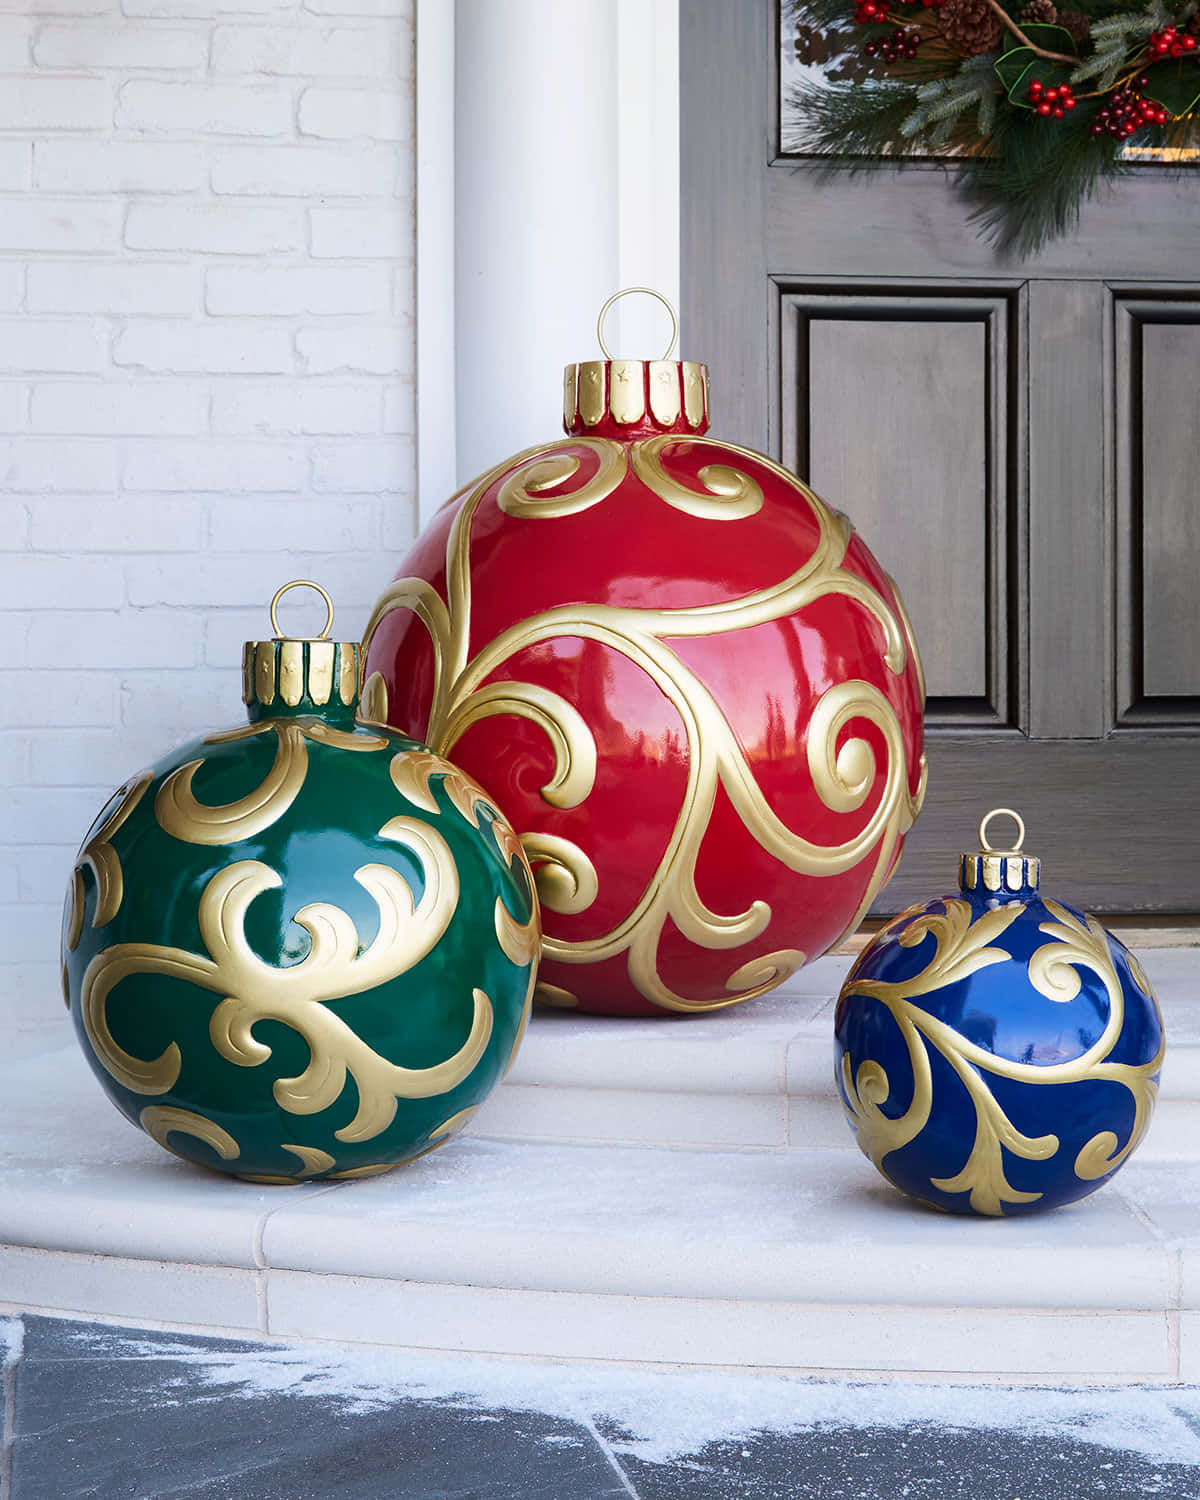 Captivating Christmas Ornaments Displayed in Celebration